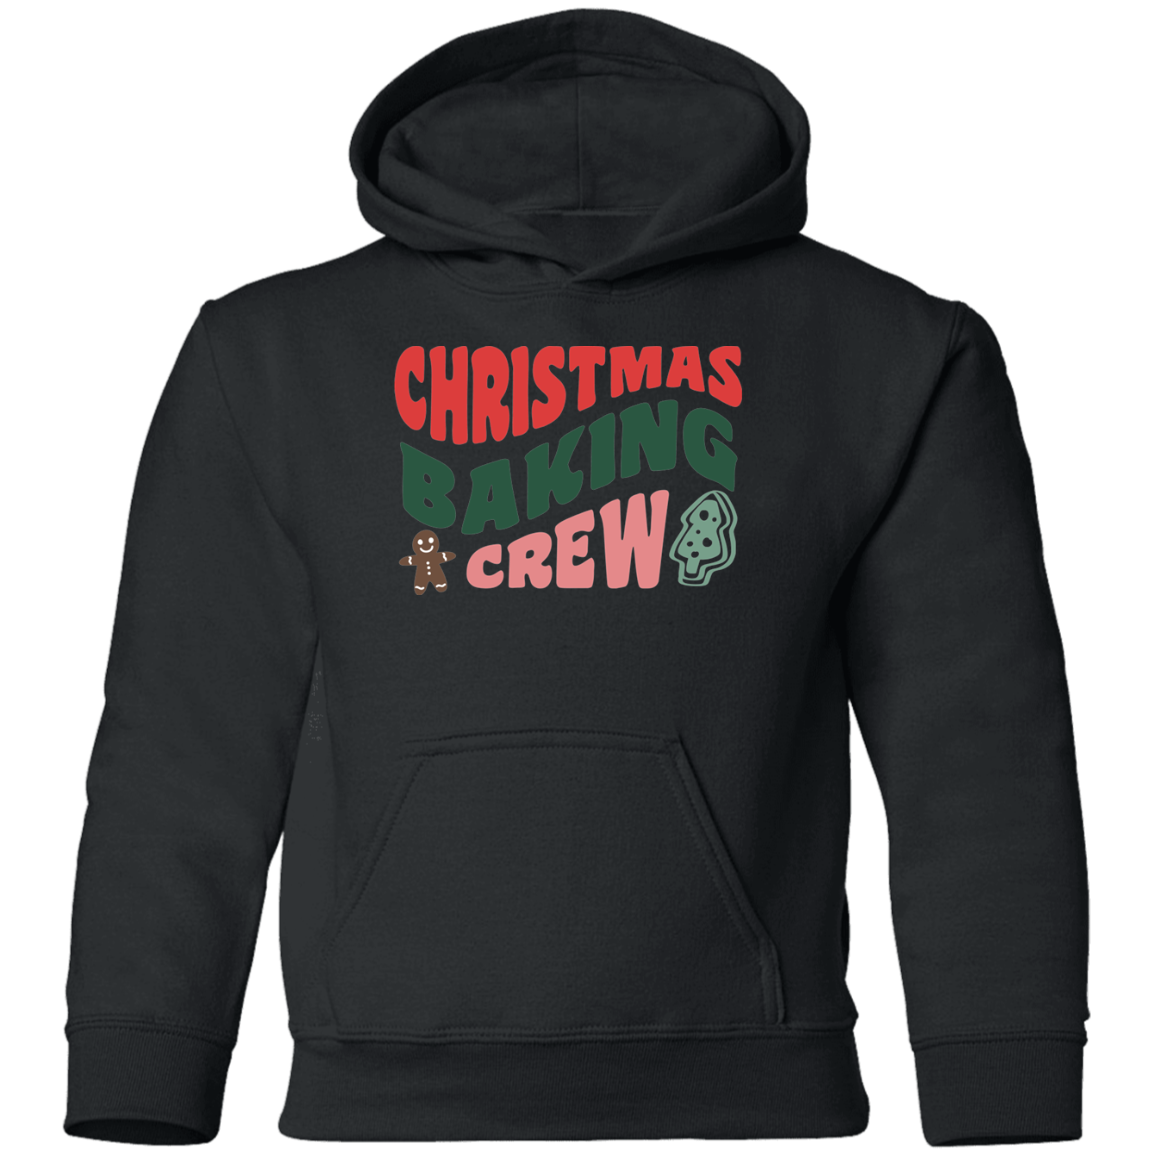 Baking Crew Youth Pullover Hoodie